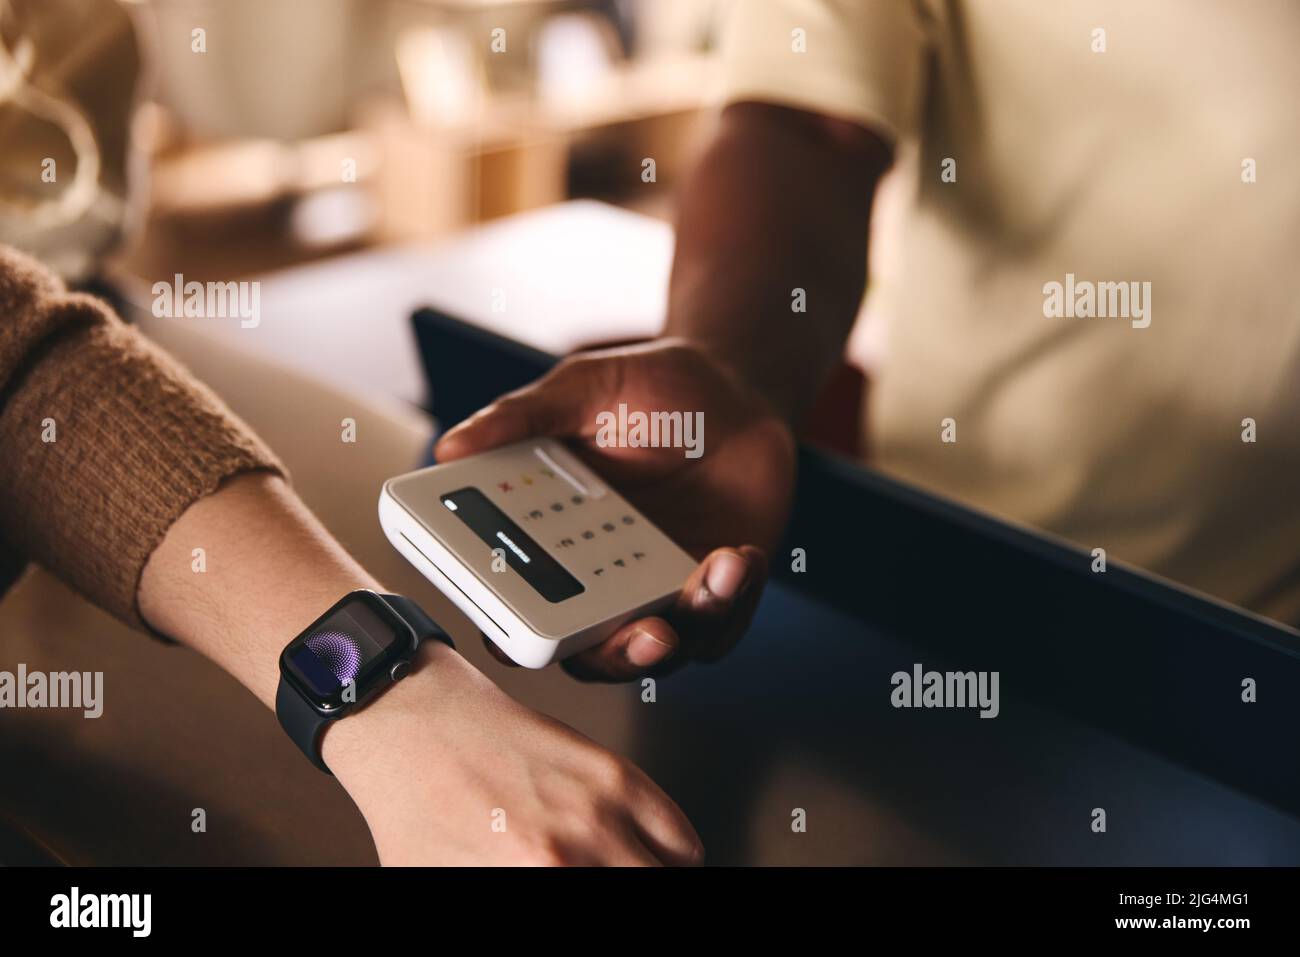 Customer Paying Using Smart Watch Mobile Payment NFC Contactless Technology In Retail Store Stock Photo